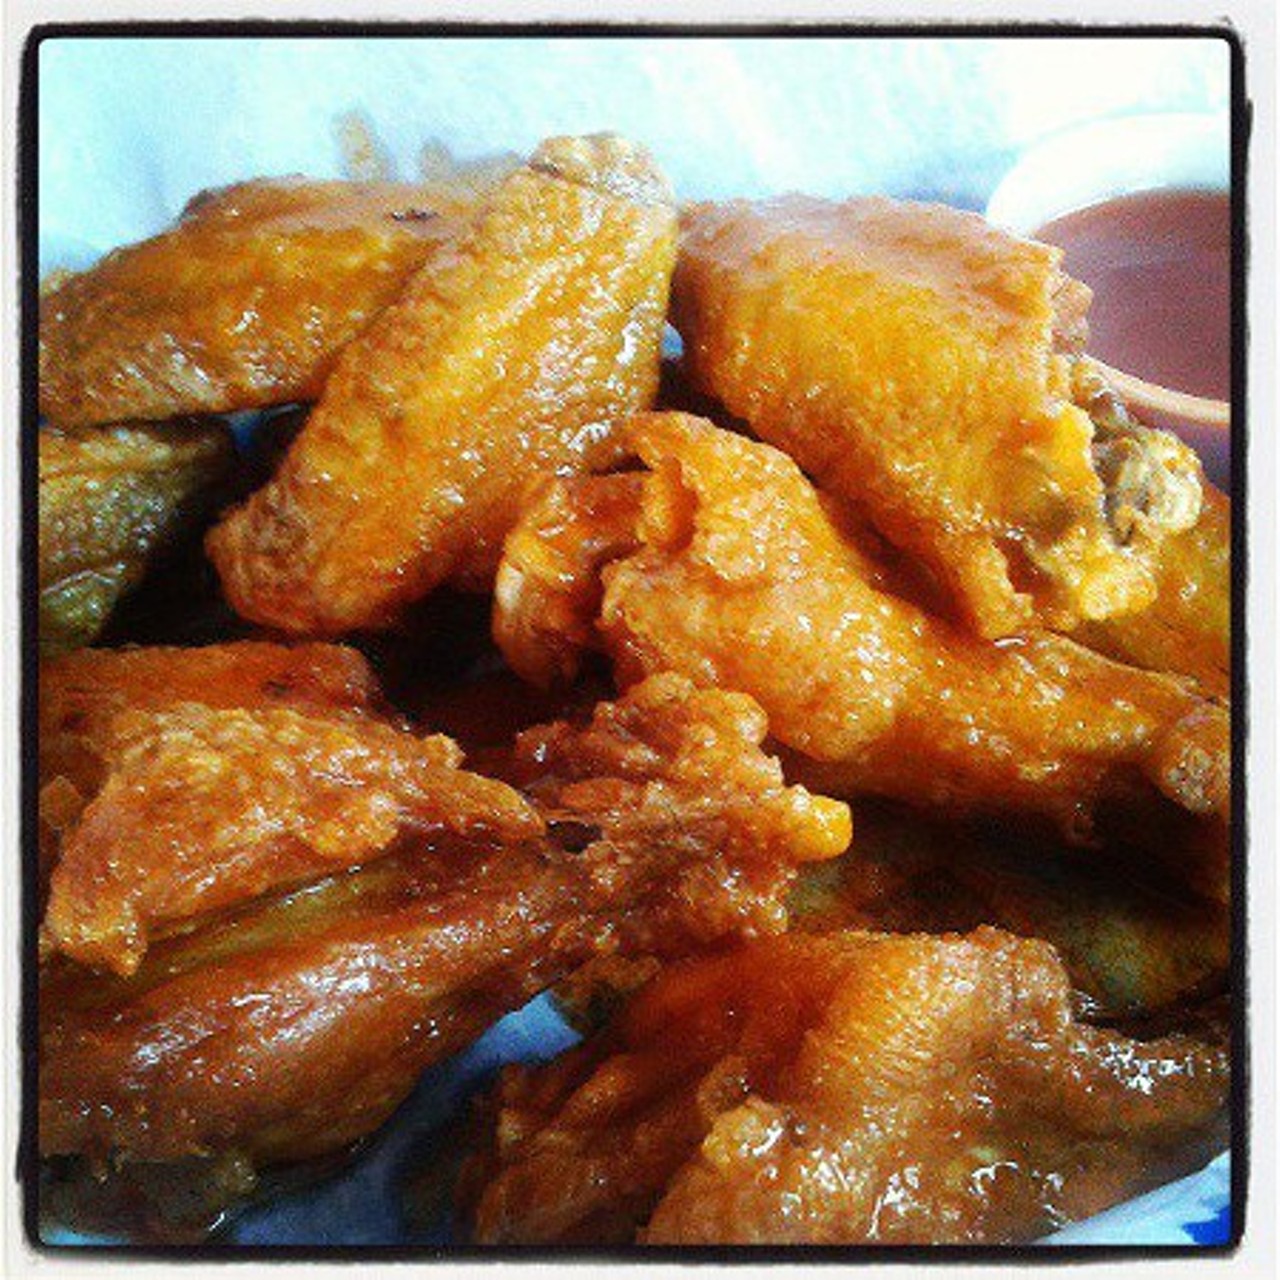 Around the Corner - This Lakewood landmark is known for its great bar promotions, but they have also won awards for their deep fried wings. We recommend the black pepper dry rub. Around the Corner is located at 18616 Detroit Ave. Call (216) 521-4413 for more information.